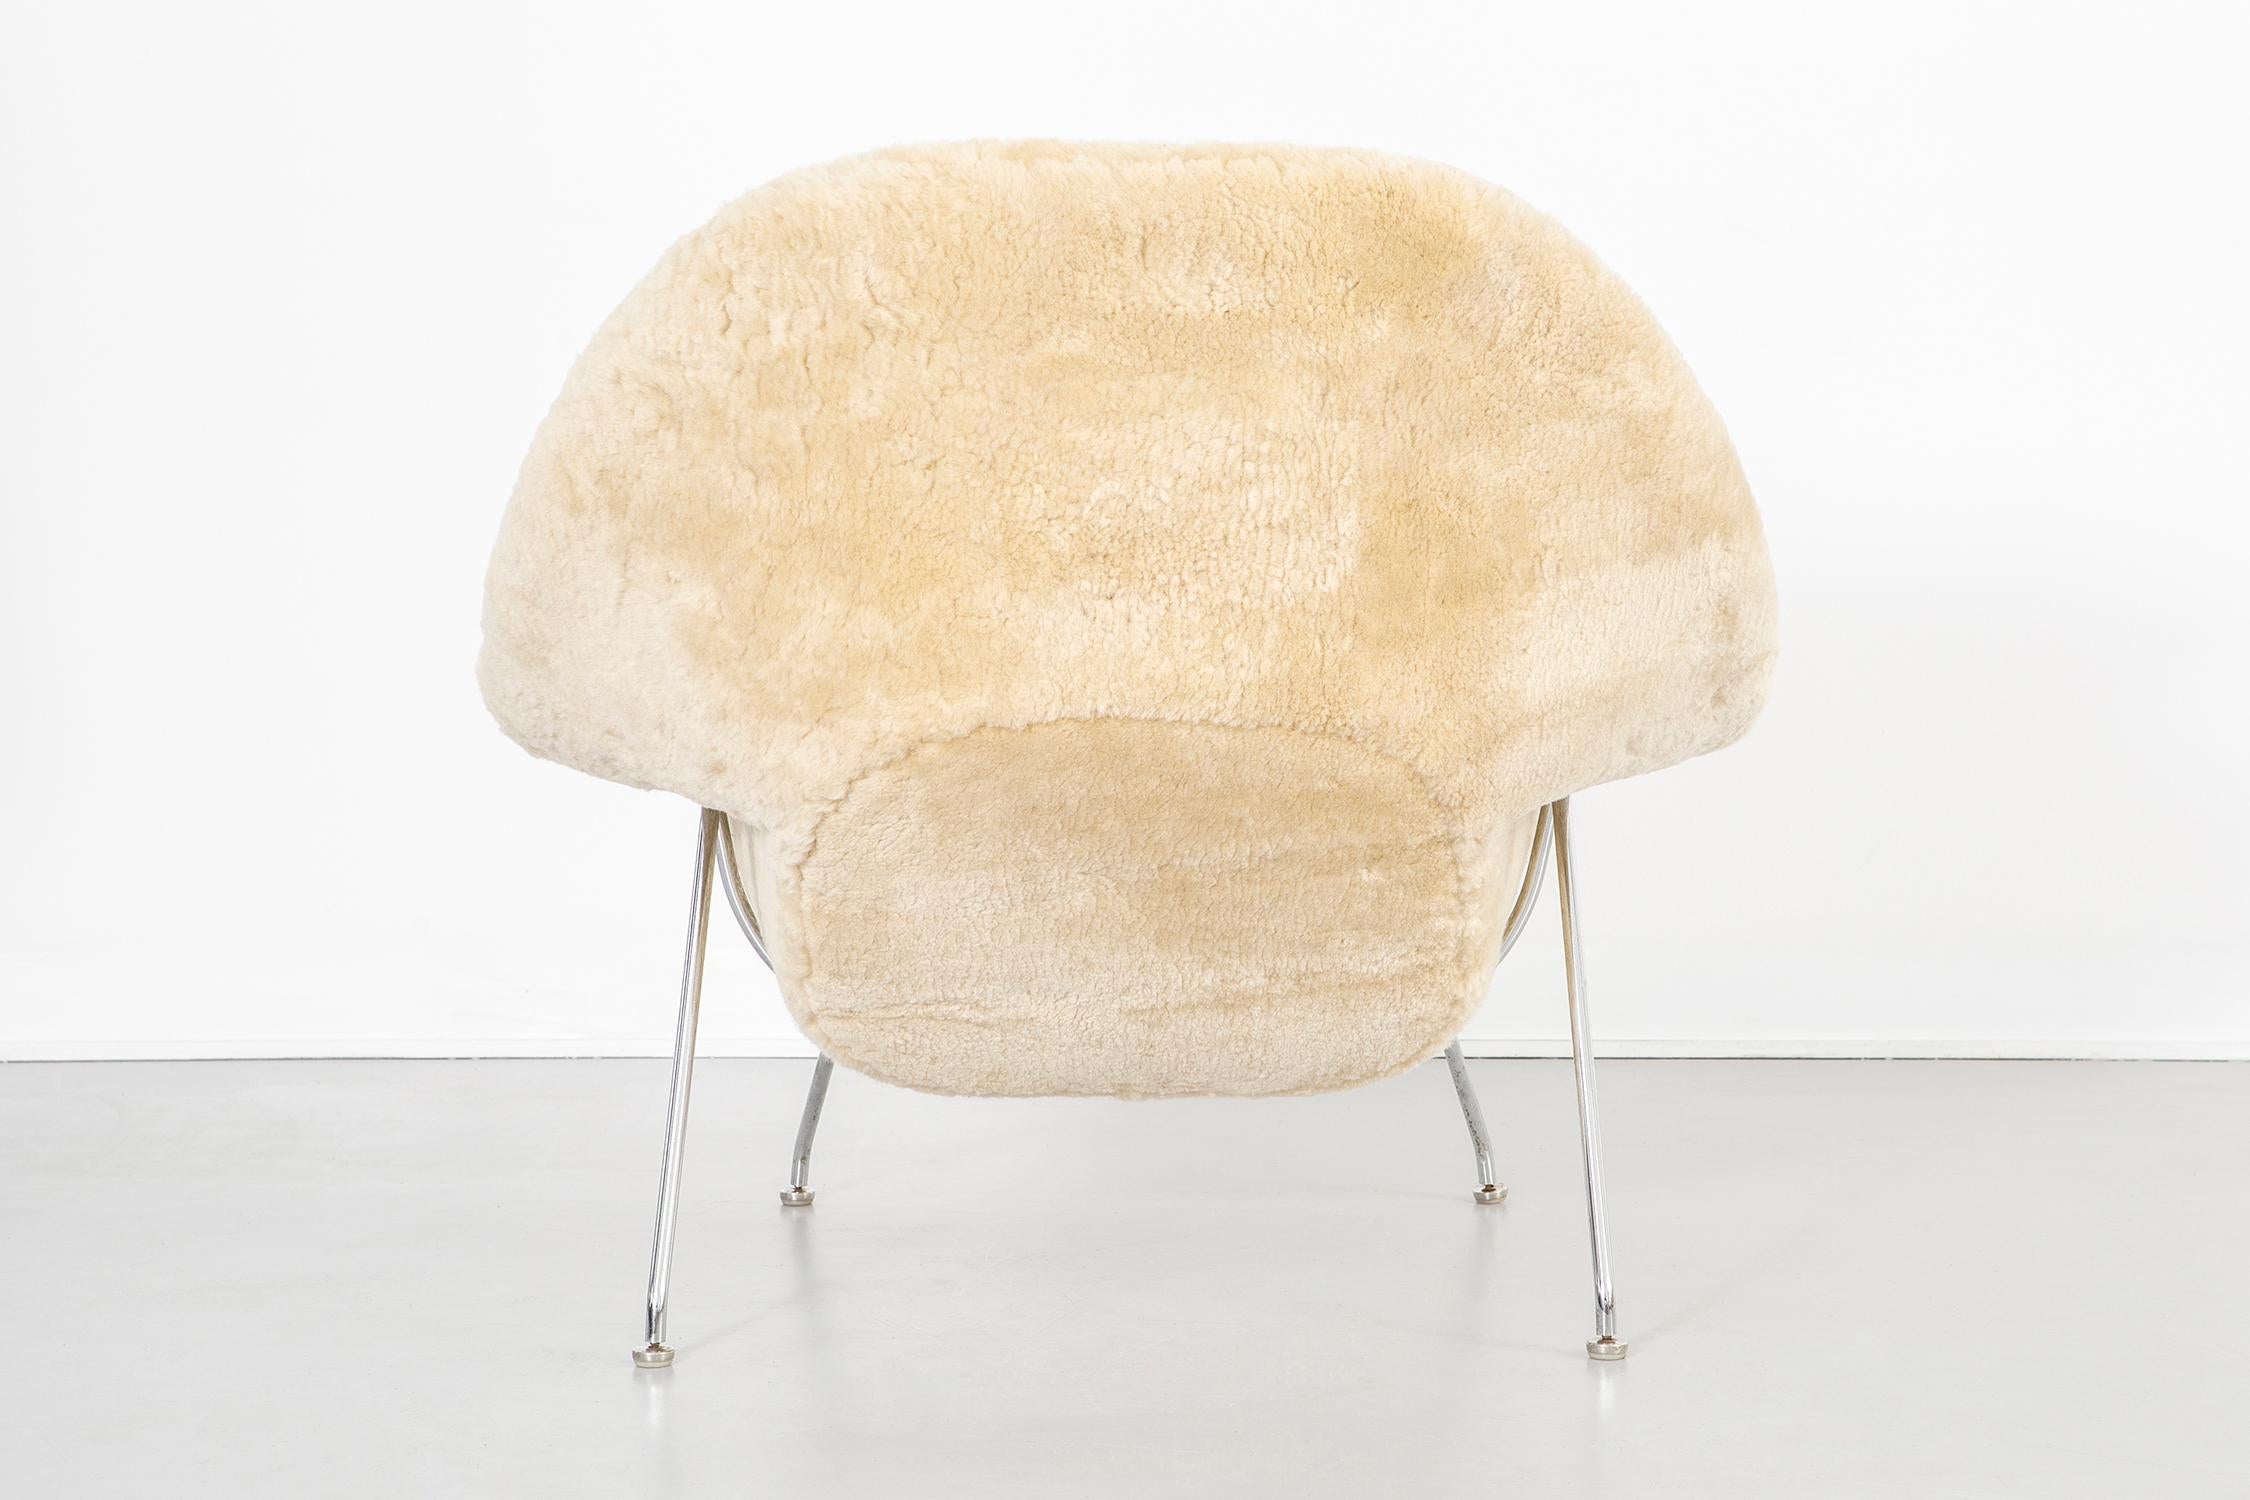 Mid-20th Century Mid-Century Modern Eero Saarinen for Knoll Womb Chair Reupholstered in Shearling